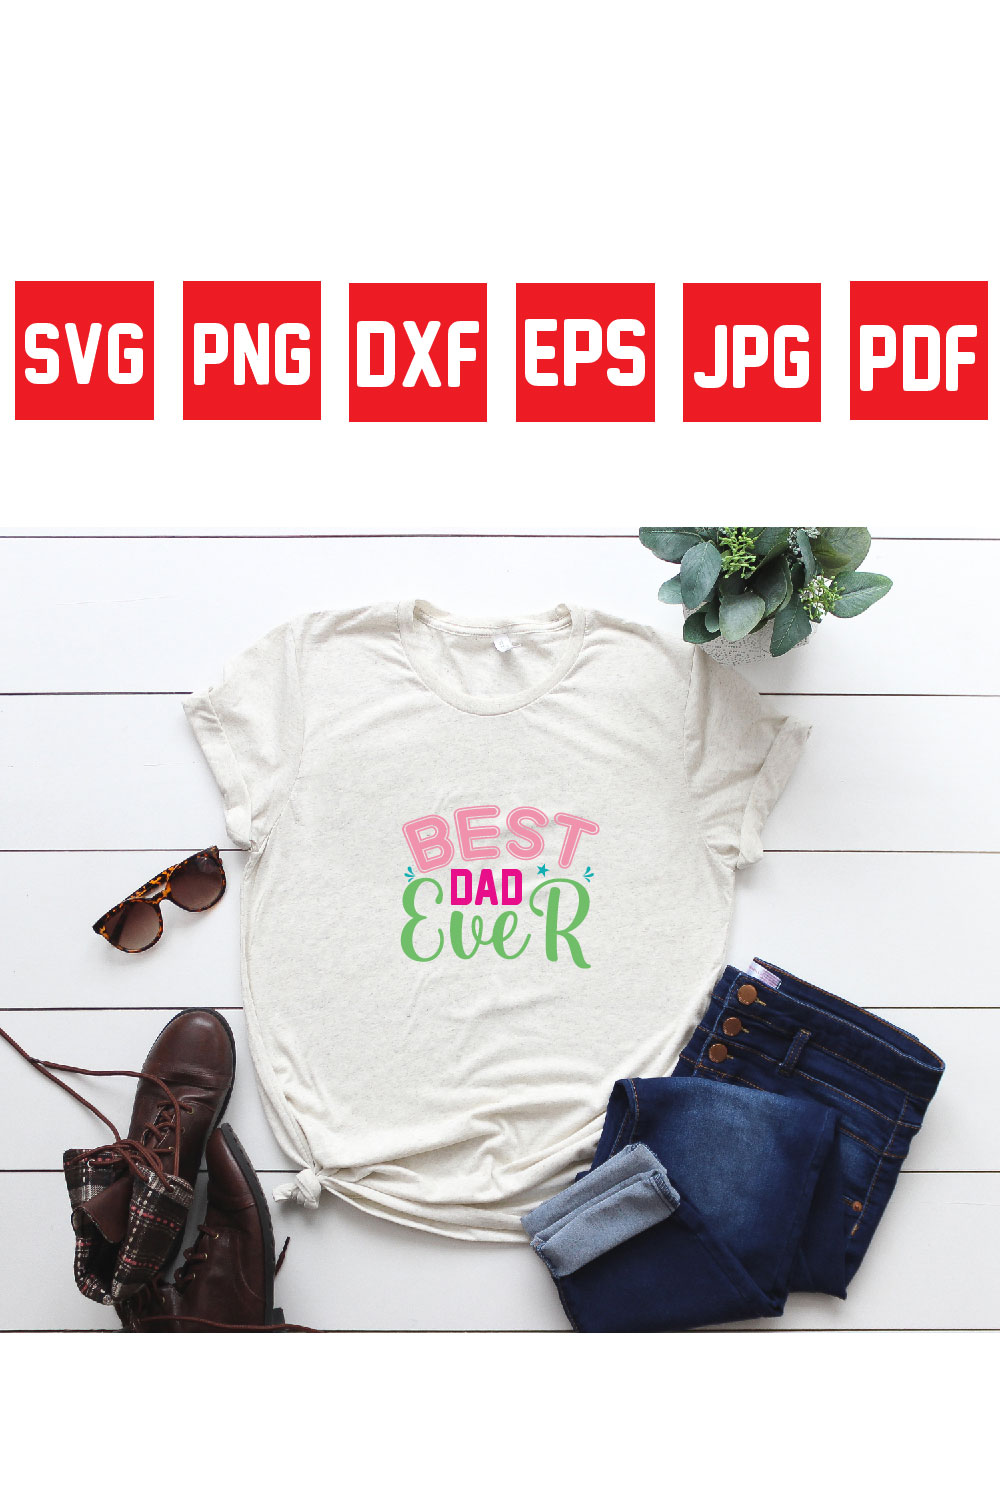 best dad ever pinterest preview image.